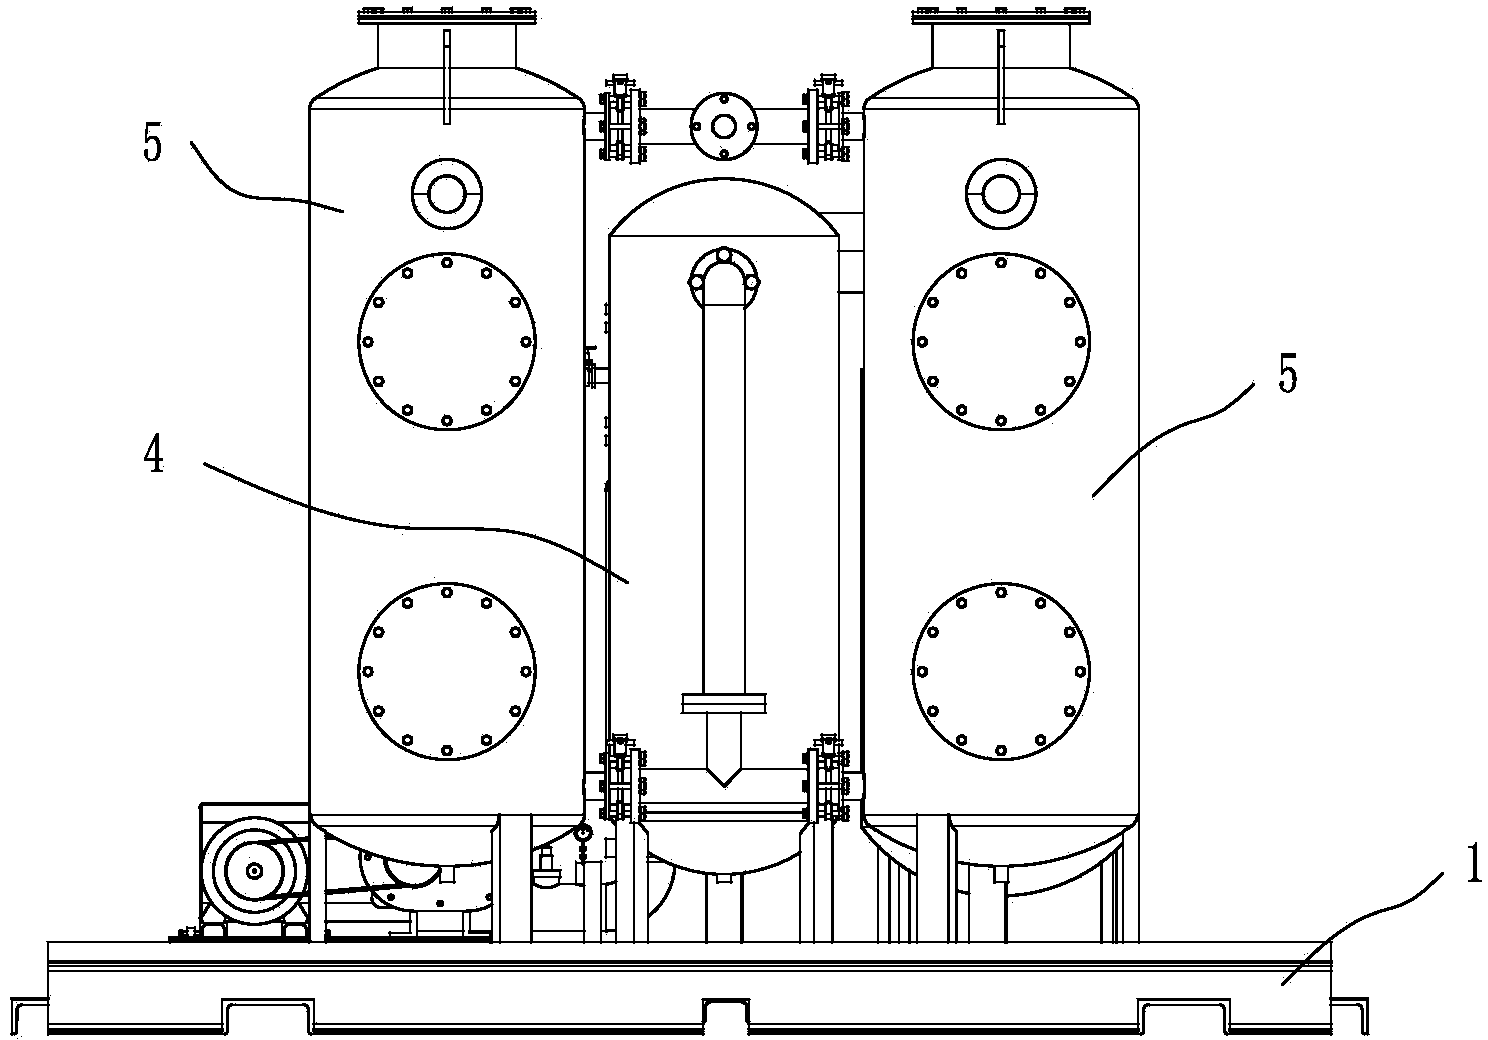 Integrated biogas treatment system